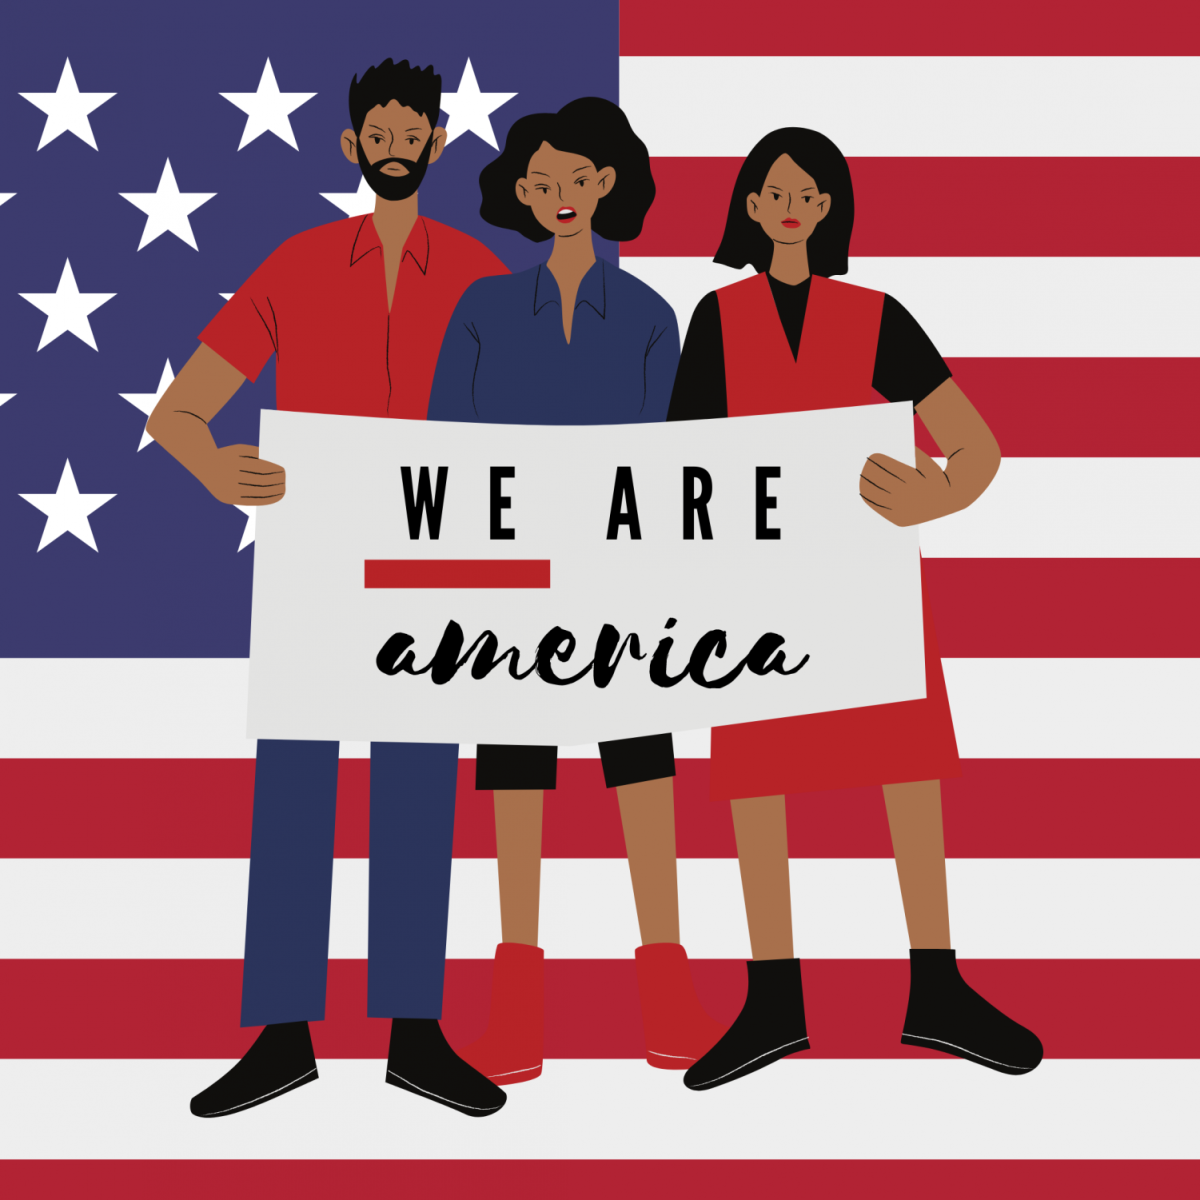 An illustration of three people of color, one man and two women, stand in front of an American Flag holding a sign that reads “WE are America.”